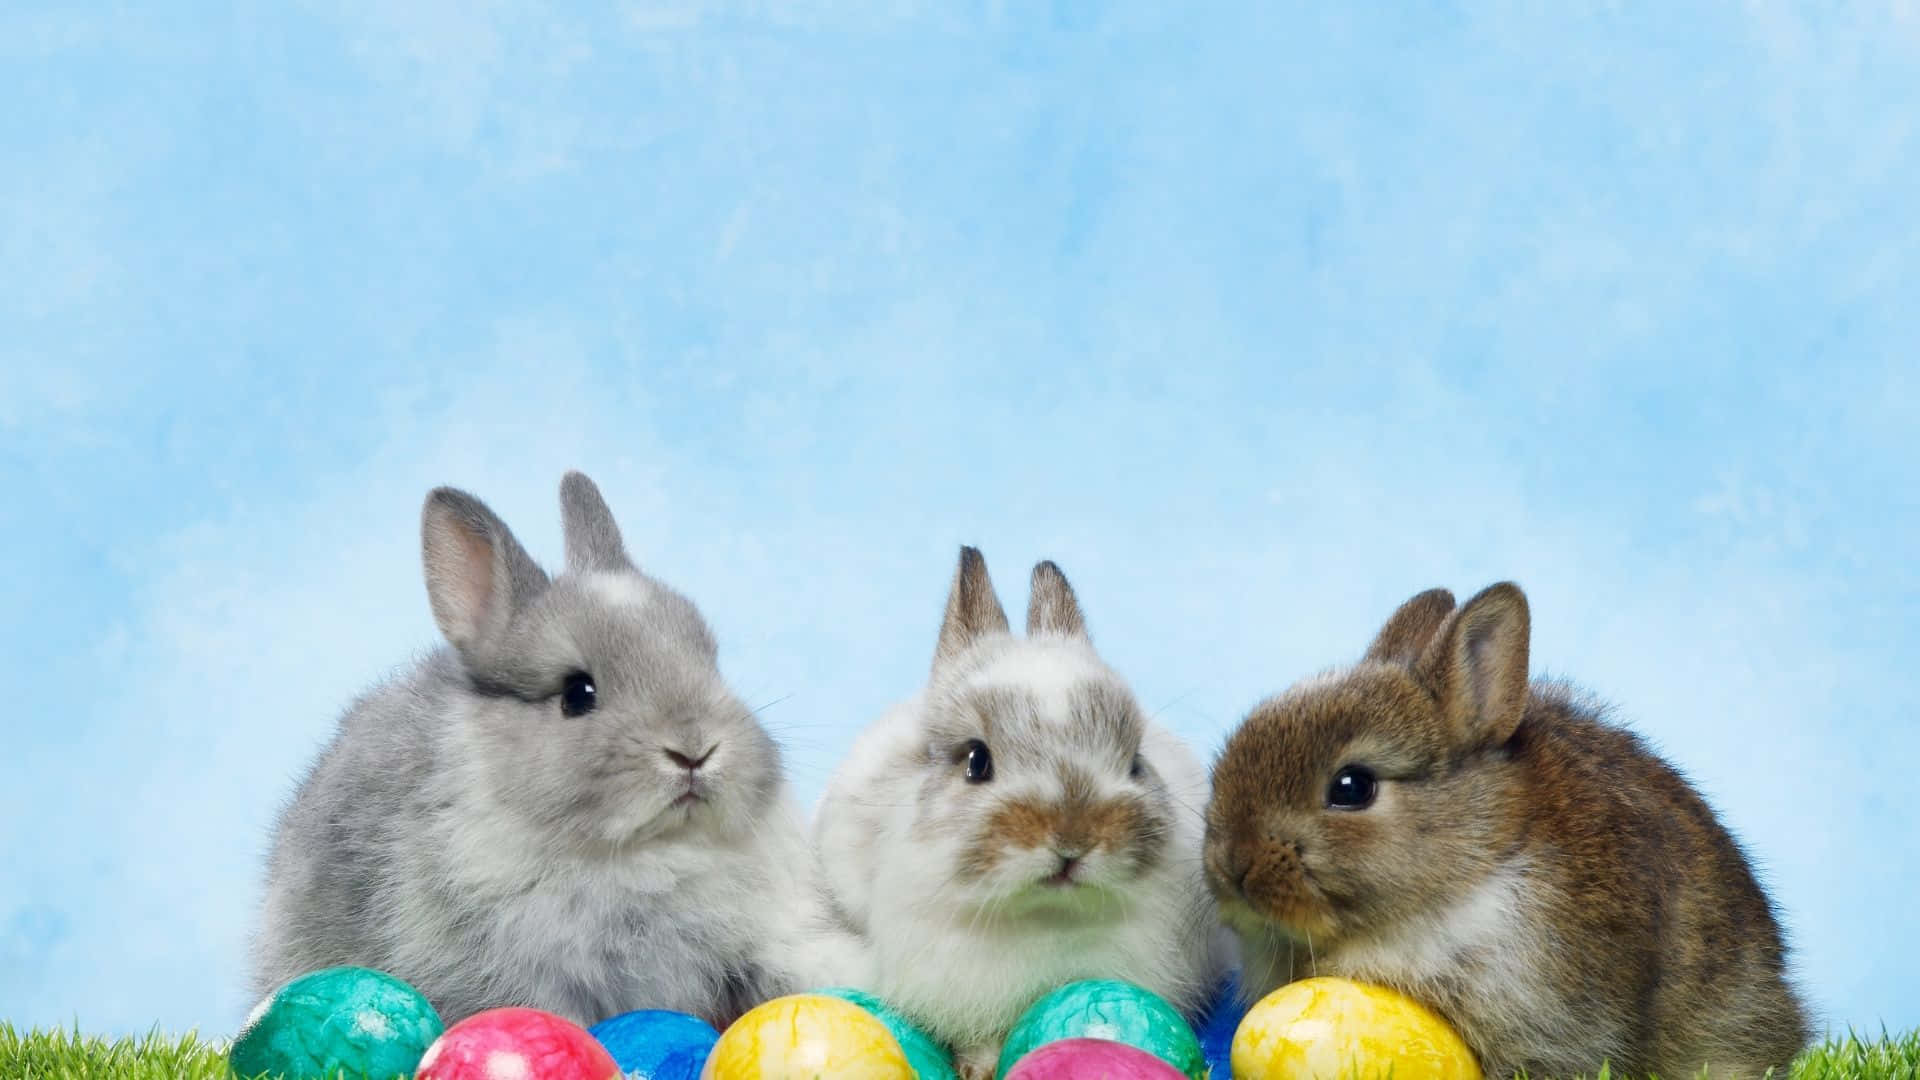 Three Rabbits Are Sitting In The Grass With Easter Eggs Background